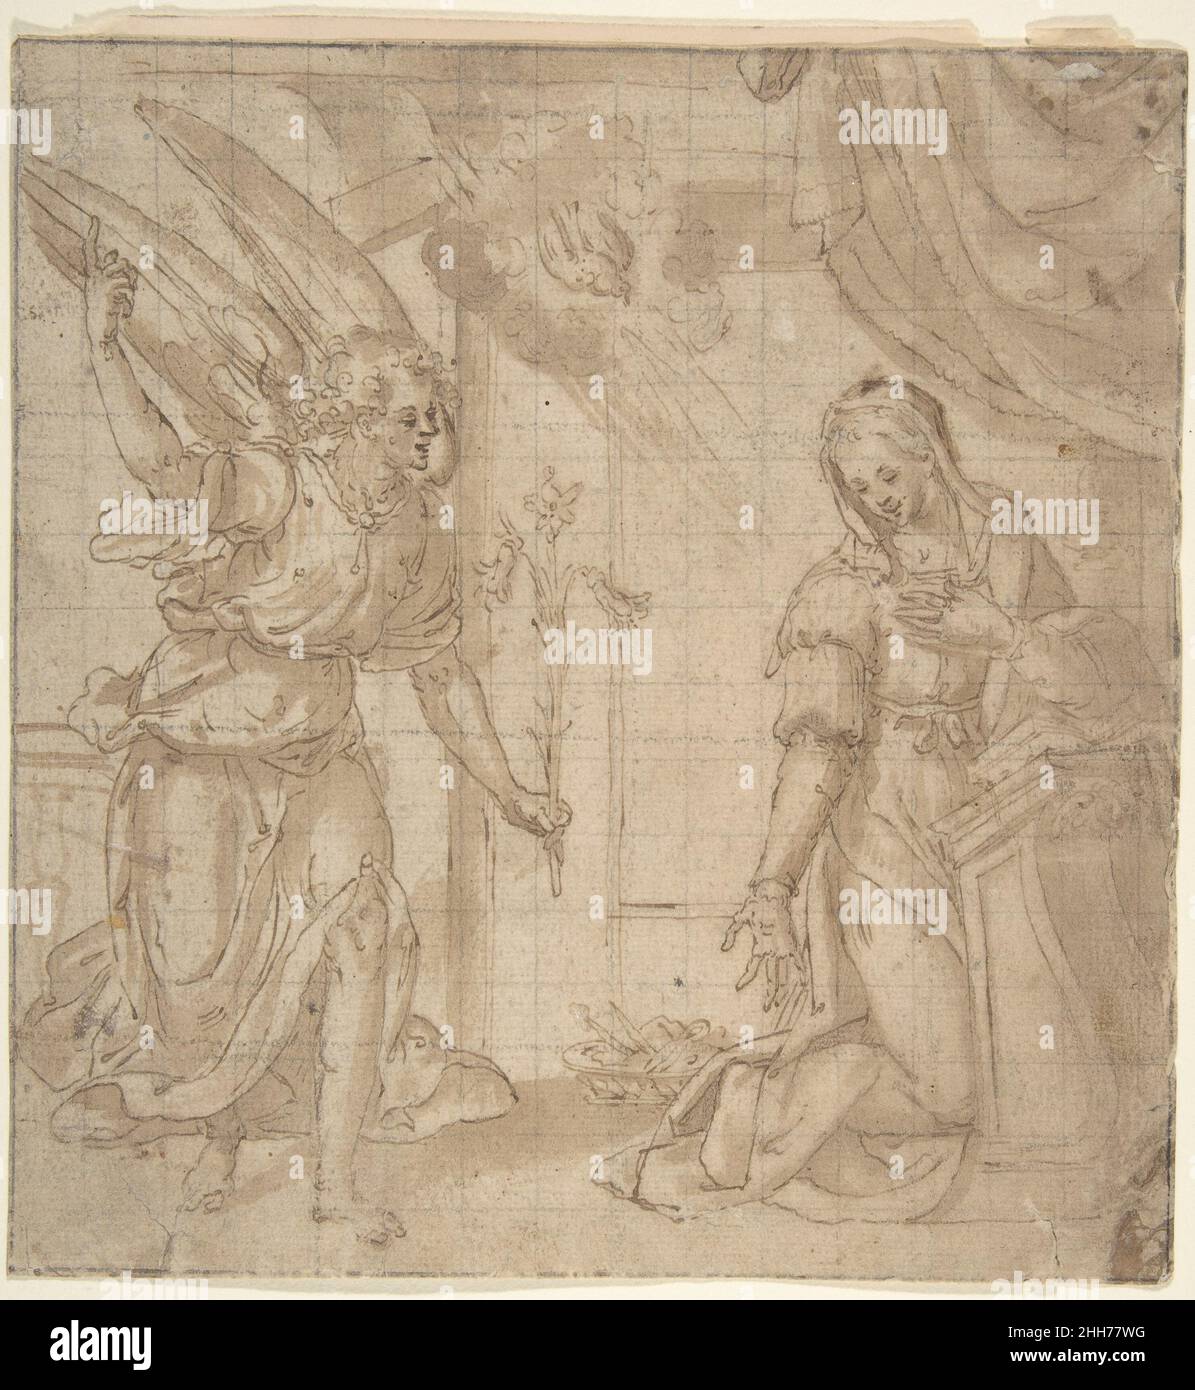 Annunciation 1560–1600 Marchigian artist near Filippo Bellini Italian. Annunciation. Marchigian artist near Filippo Bellini (Italian, Urbino 1550/55–1604 Macerata). 1560–1600. Pen and brown ink, brush and brown wash, over leadpoint or black chalk, on paper washed light brown; squared for transfer. Drawings Stock Photo